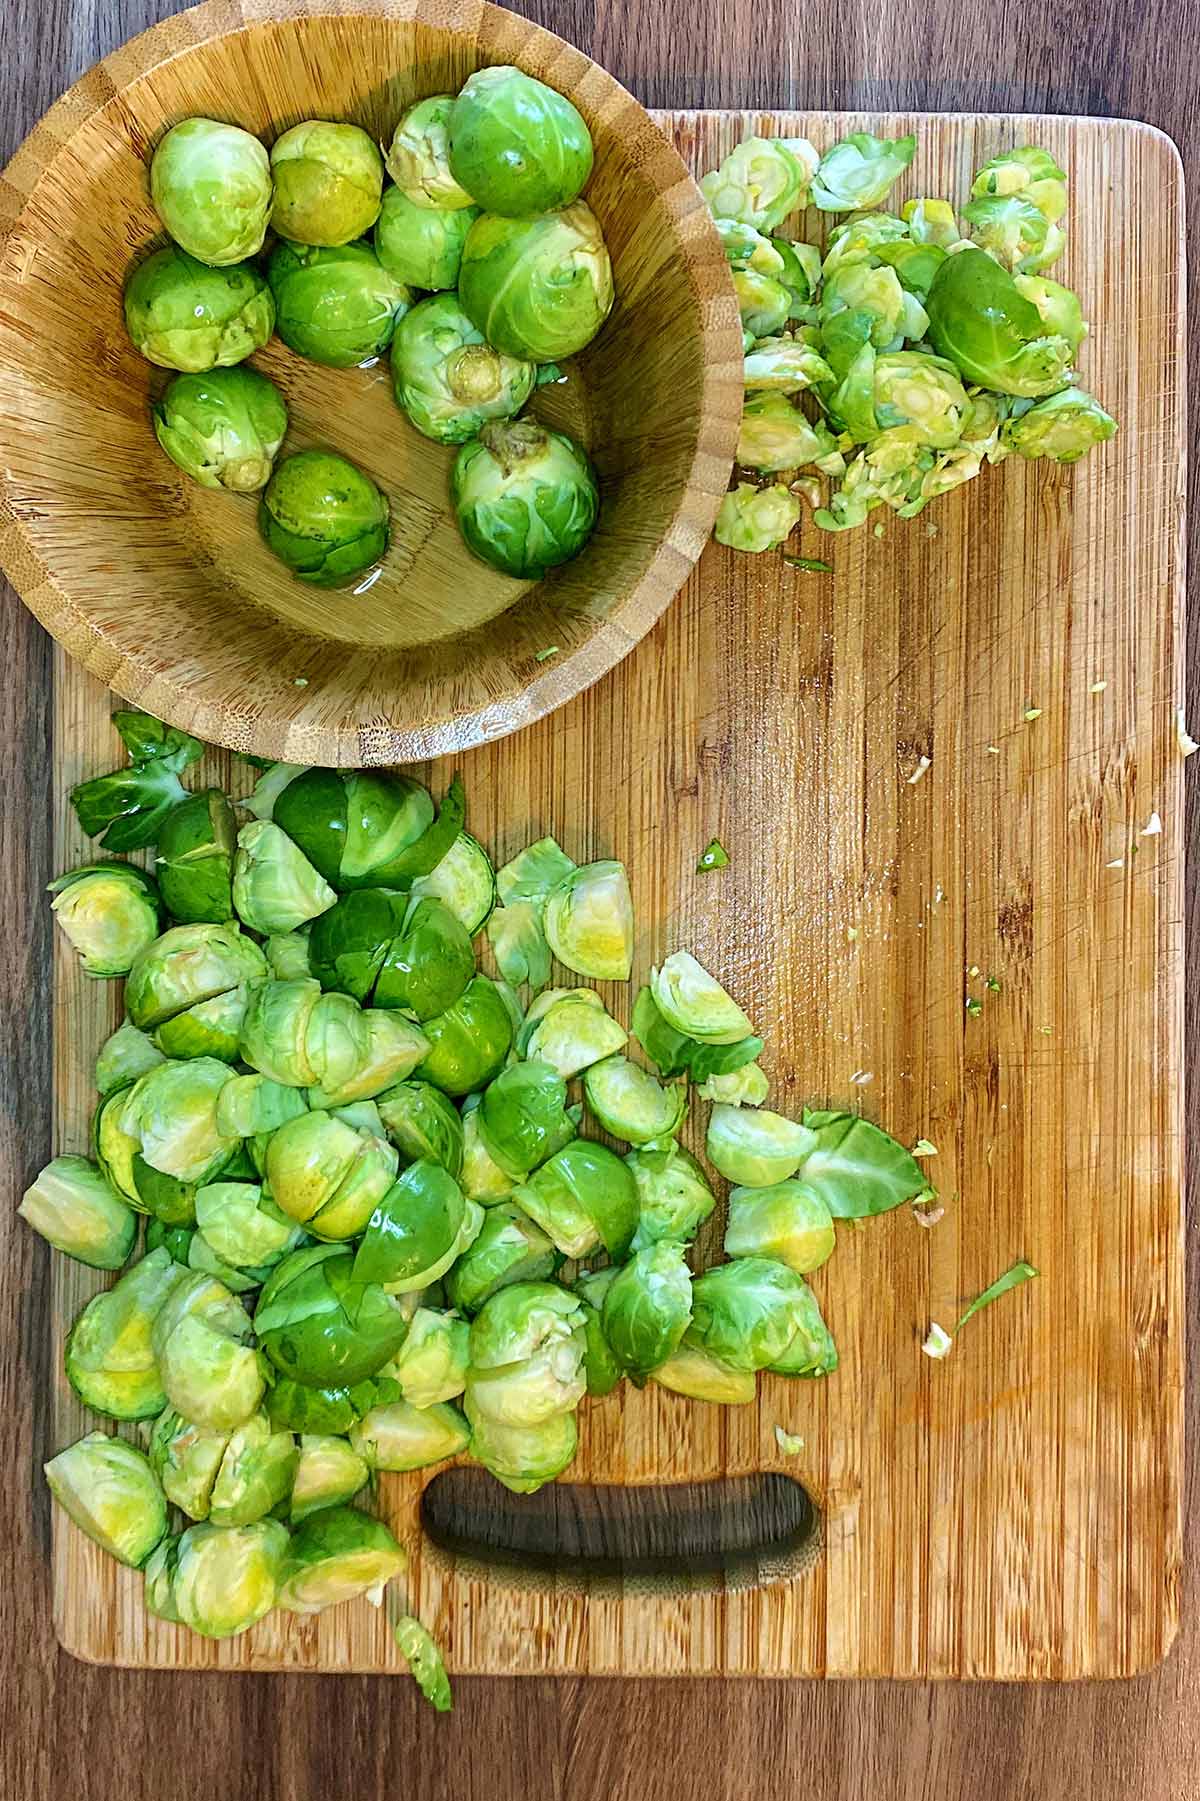 A wooden chopping board with chopped Brussels sprouts on it.